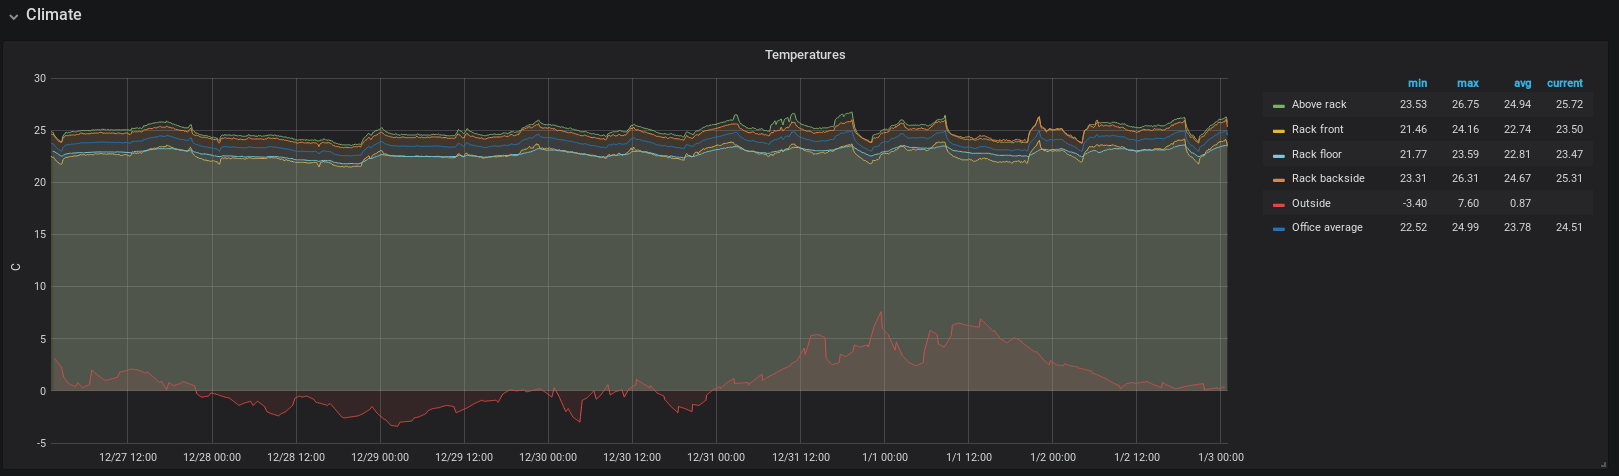 Grafana graphs, showing homelab and outside temperatures